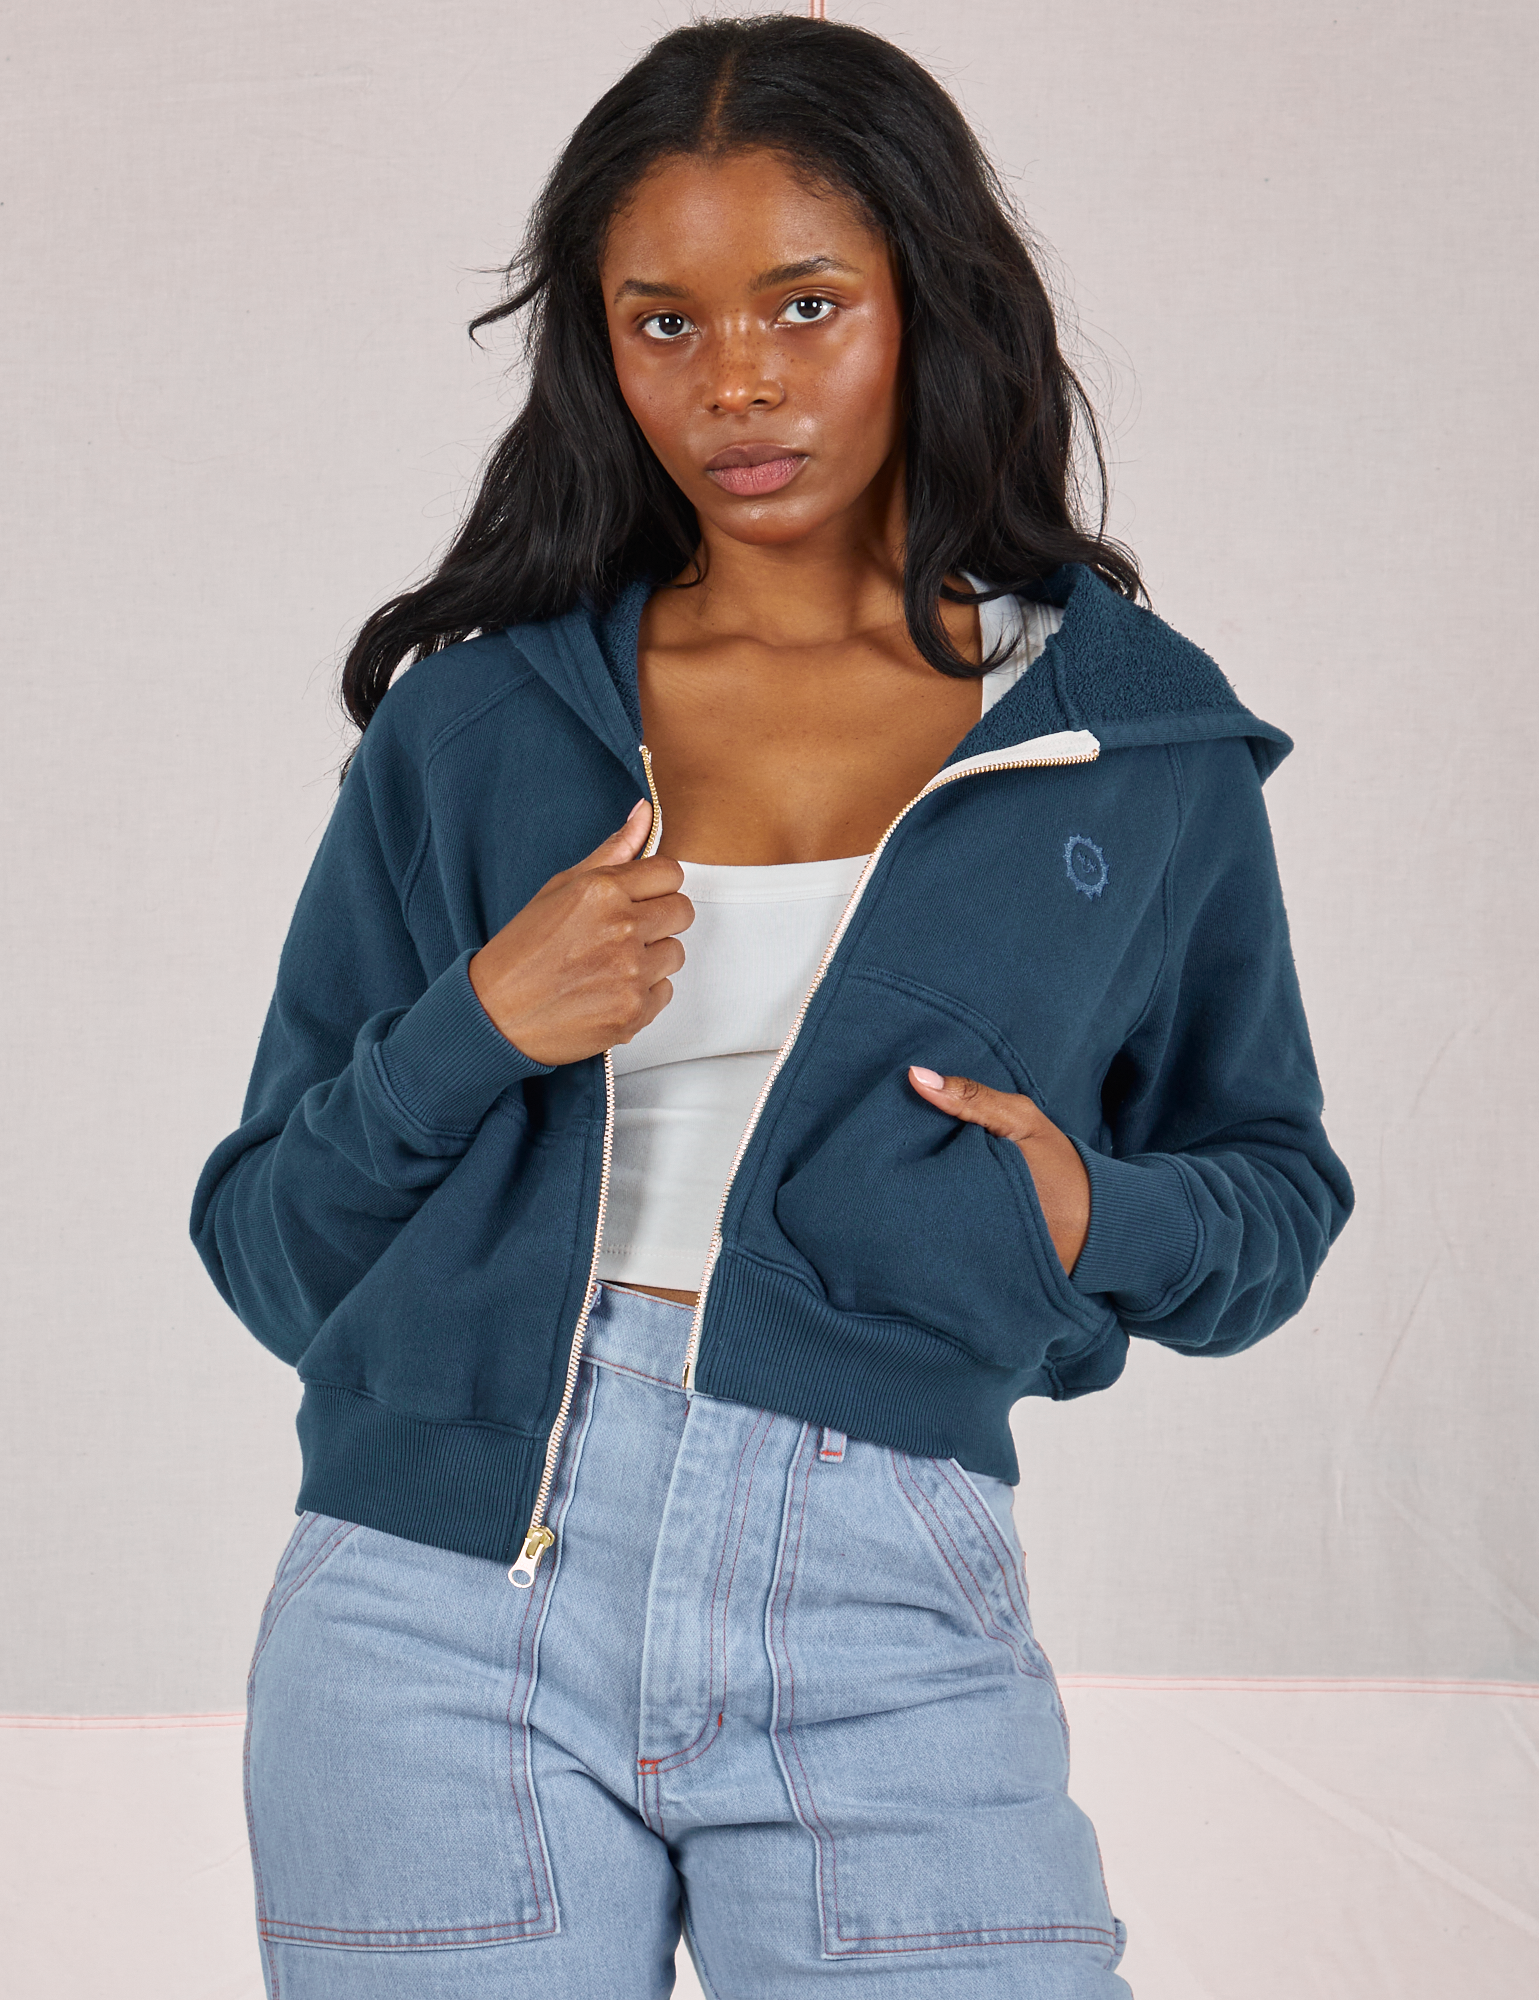 Kandia is wearing Cropped Zip Hoodie in Lagoon, a vintage off-white Cropped Tank underneath and light wash Carpenter Jeans